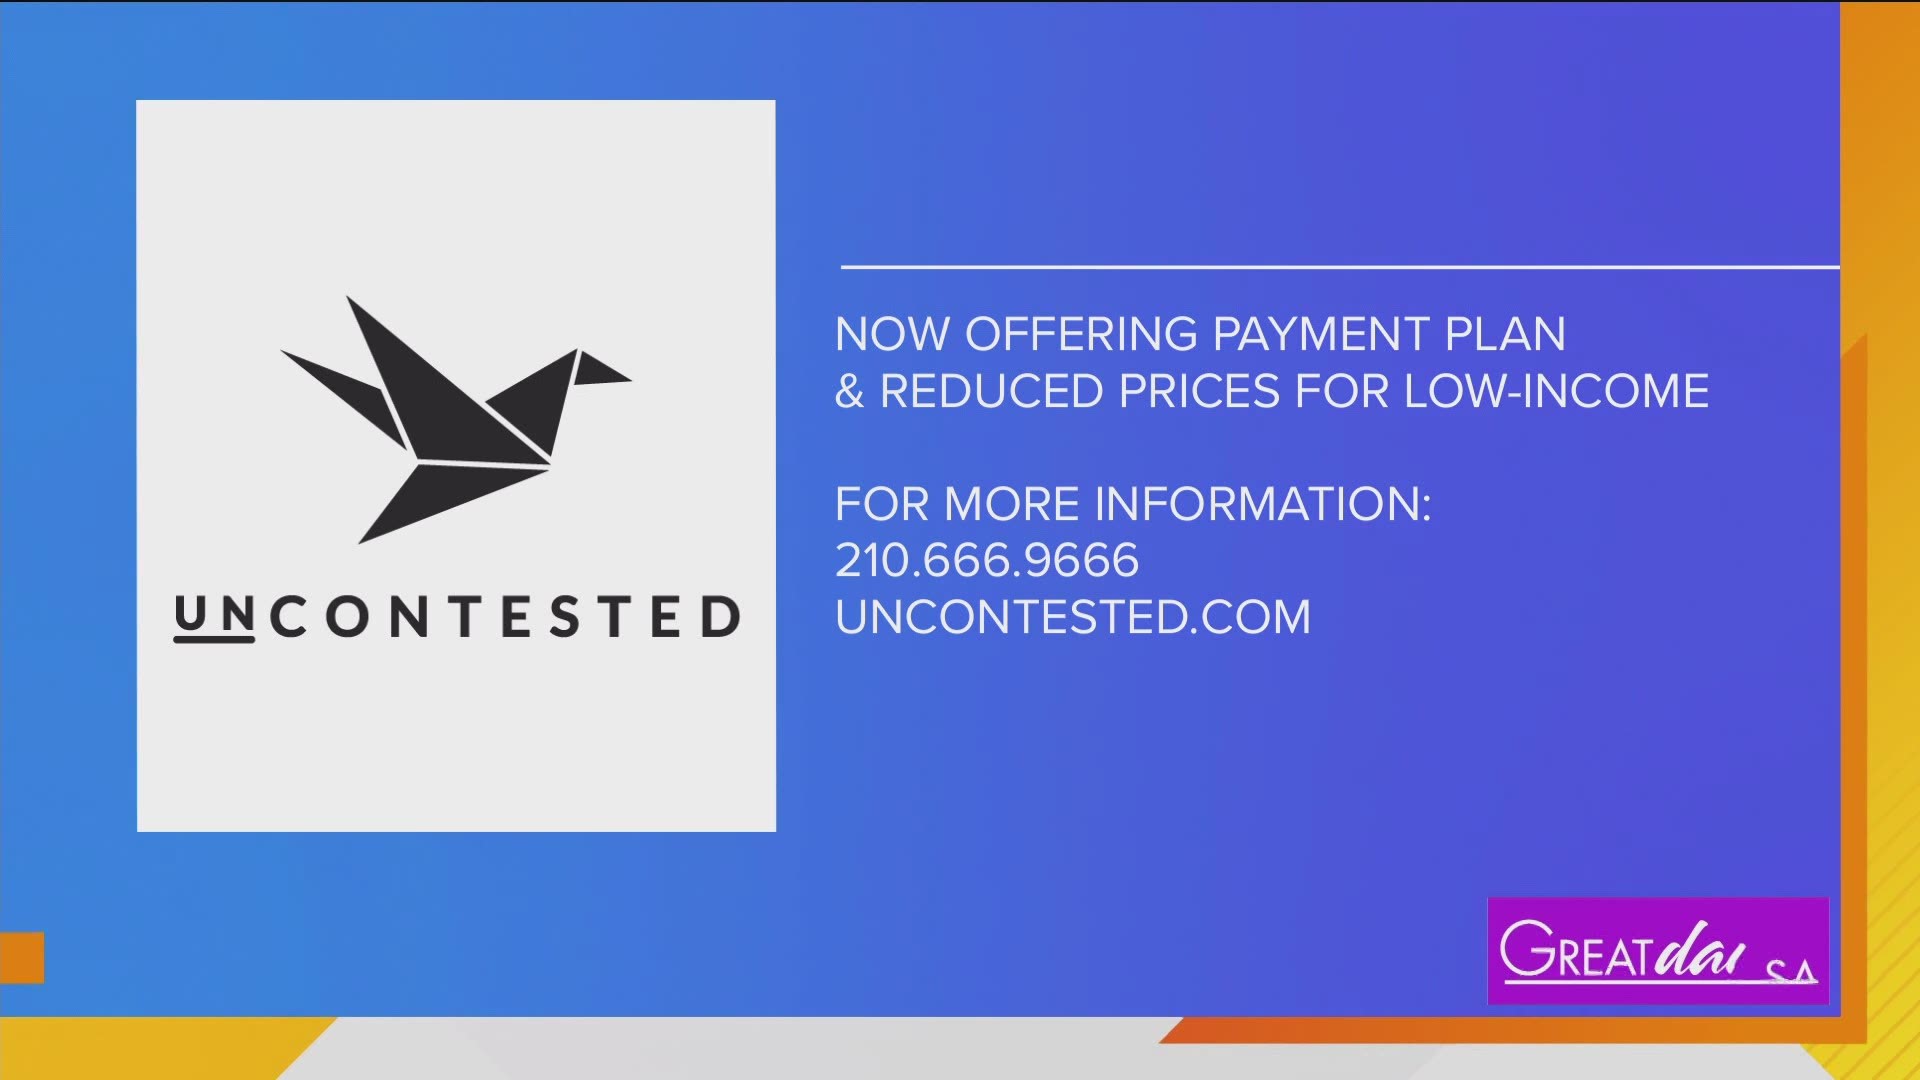 Uncontested.com is now offering payment plans and reduced prices for low-income situations.